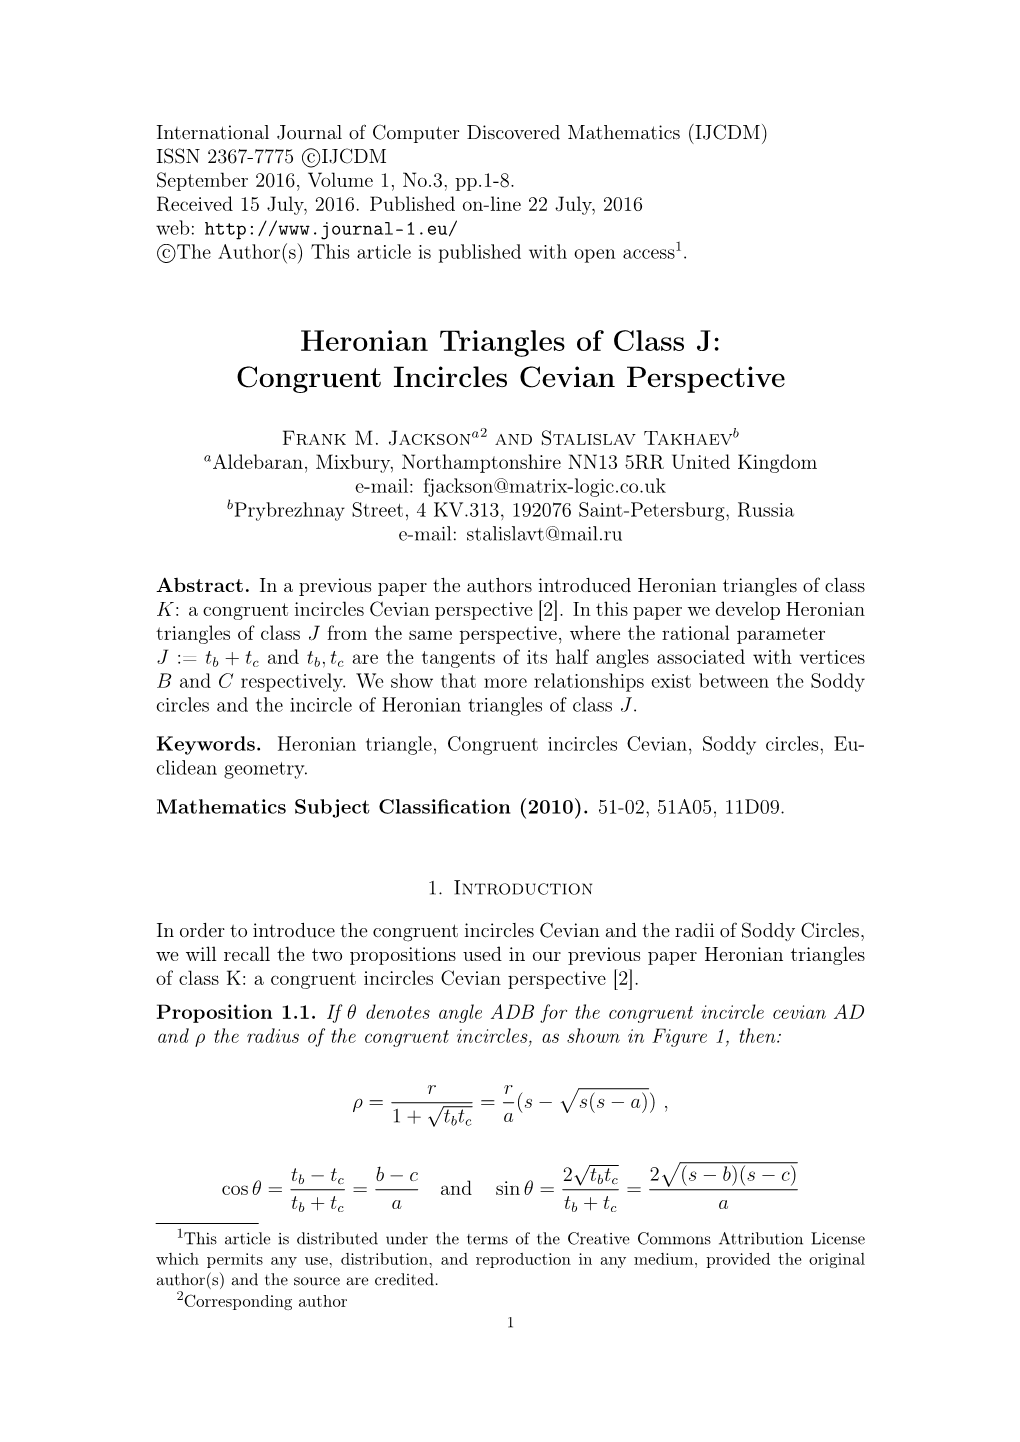 Heronian Triangles of Class J: Congruent Incircles Cevian Perspective